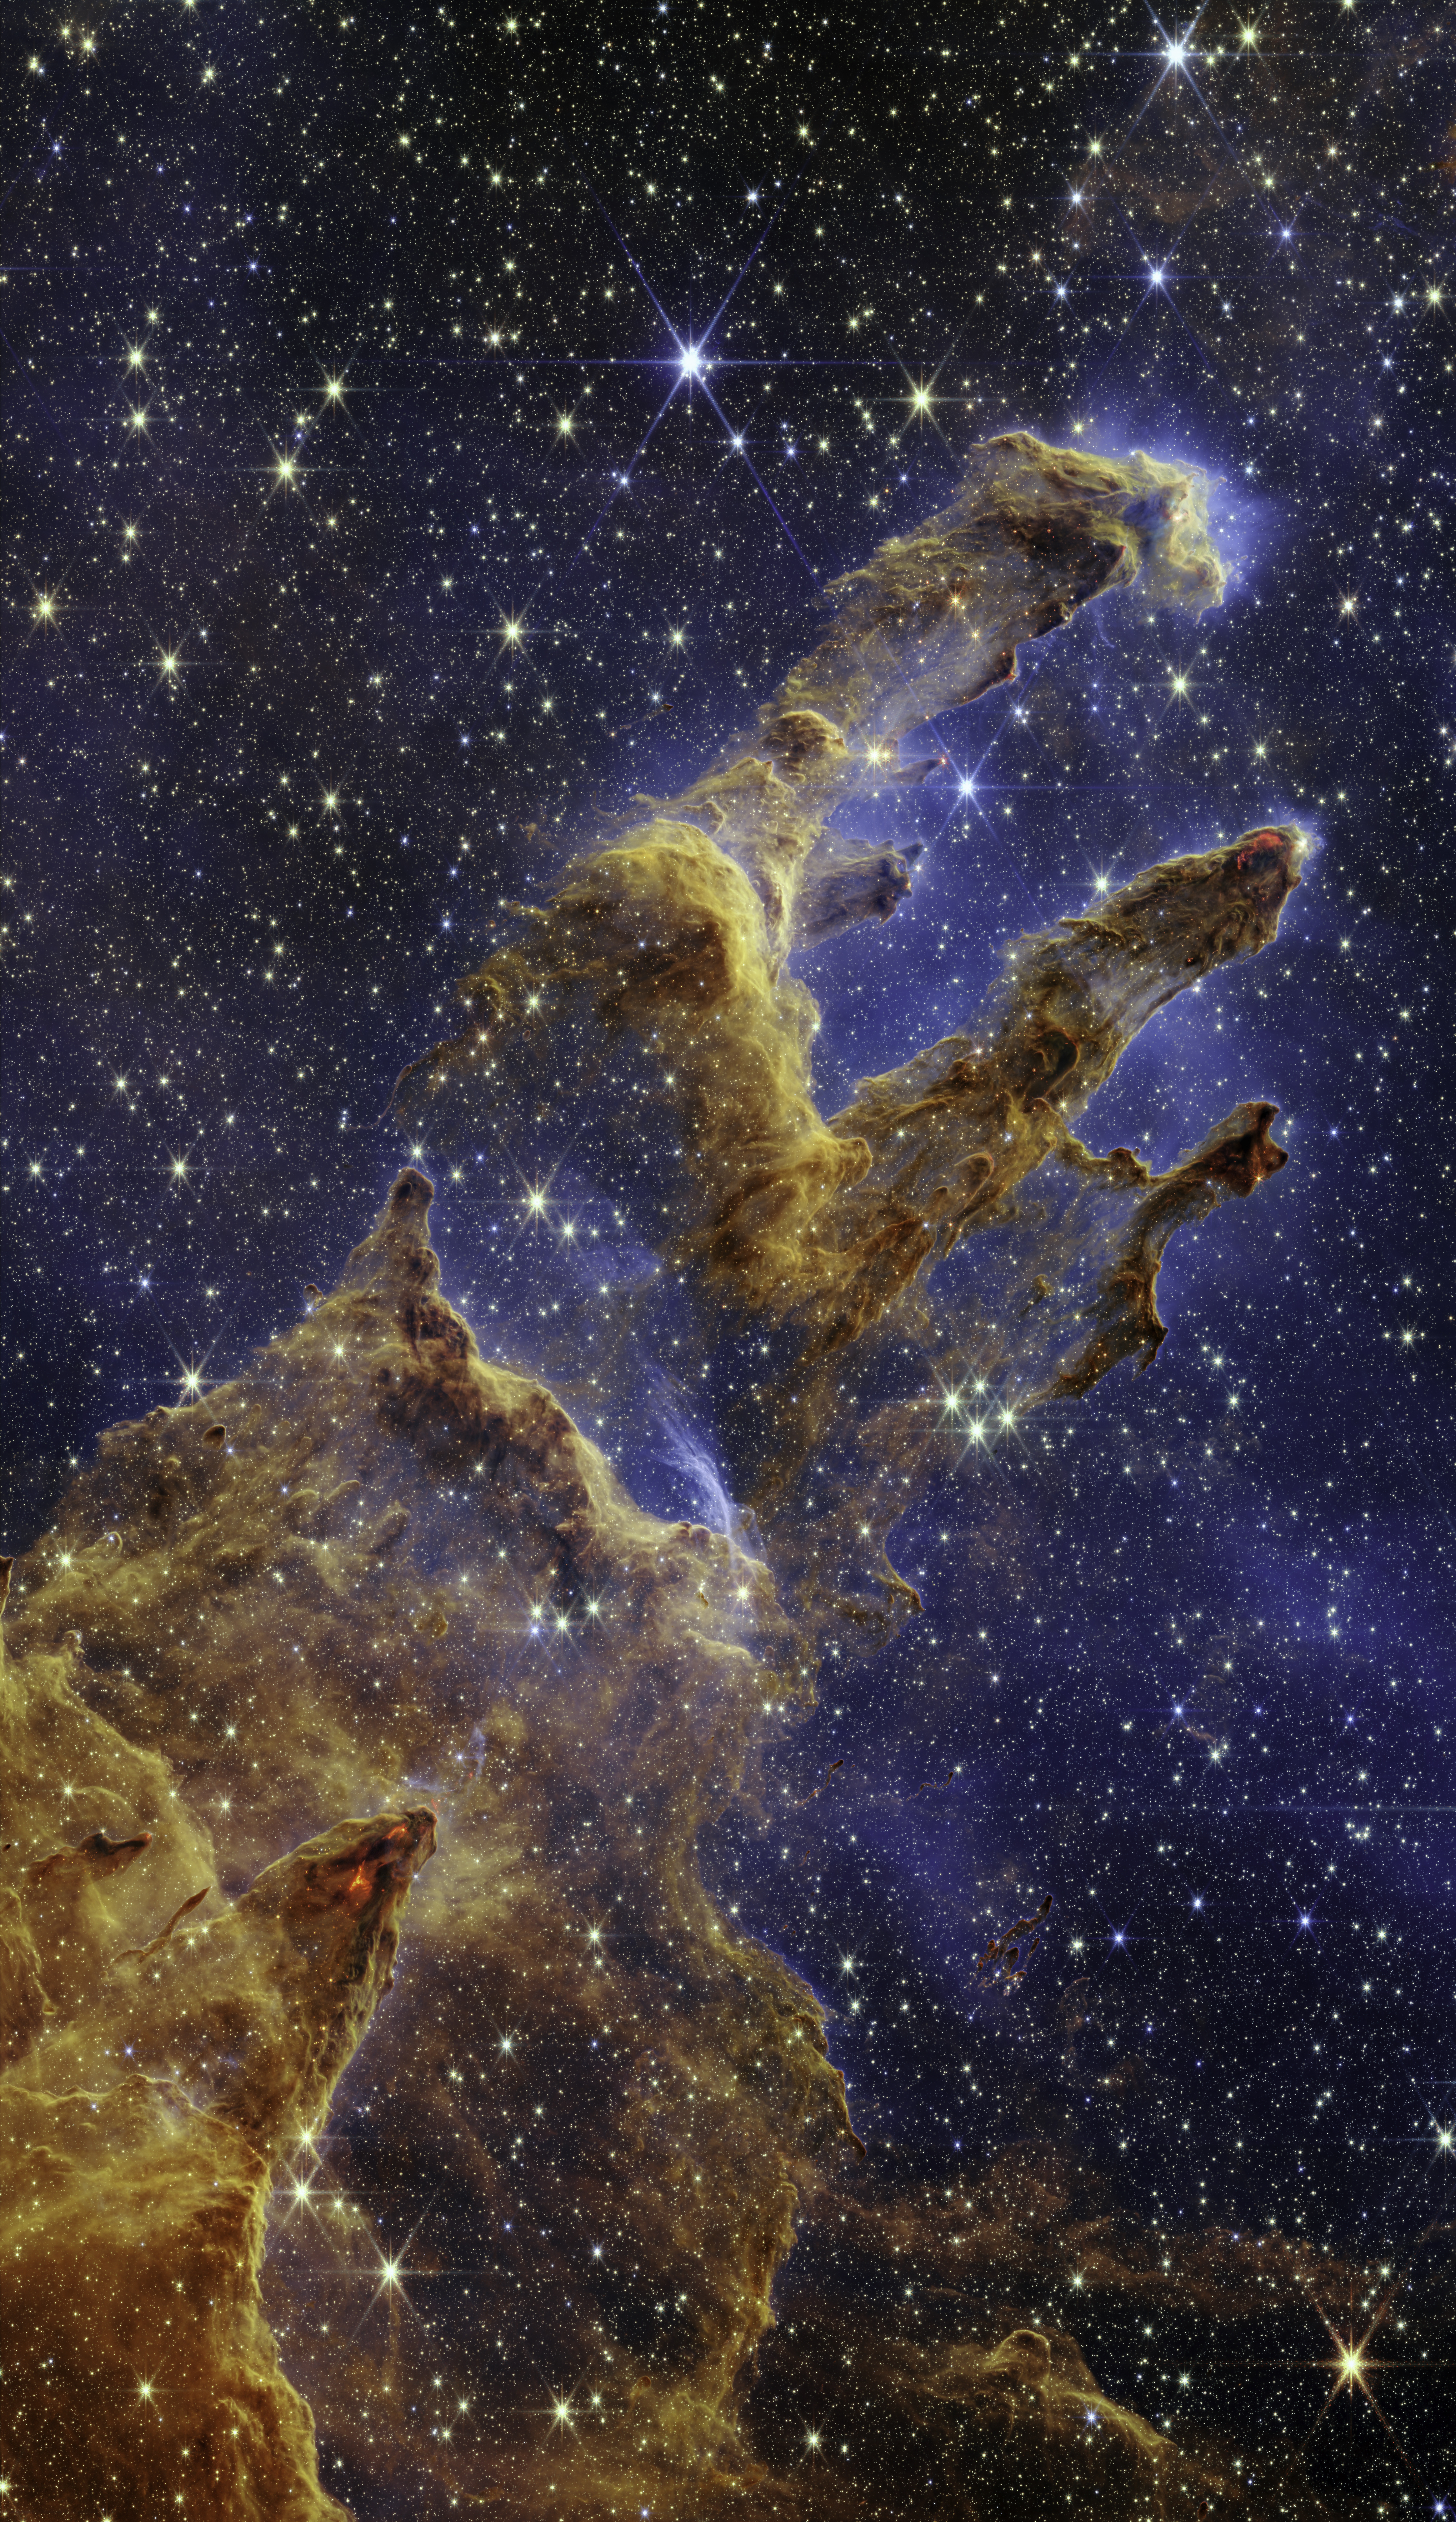 The Pillars of Creation are set off in a kaleidoscope of color in NASA’s James Webb Space Telescope’s near-infrared-light view. The pillars look like arches and spires rising out of a desert landscape, but are filled with semi-transparent gas and dust, and ever changing. This is a region where young stars are forming – or have barely burst from their dusty cocoons as they continue to form. Newly formed stars are the scene-stealers in this Near-Infrared Camera (NIRCam) image. These are the bright red orbs that sometimes appear with eight diffraction spikes. When knots with sufficient mass form within the pillars, they begin to collapse under their own gravity, slowly heat up, and eventually begin shining brightly. Along the edges of the pillars are wavy lines that look like lava. These are ejections from stars that are still forming. Young stars periodically shoot out supersonic jets that can interact within clouds of material, like these thick pillars of gas and dust. This sometimes also results in bow shocks, which can form wavy patterns like a boat does as it moves through water. These young stars are estimated to be only a few hundred thousand years old, and will continue to form for millions of years. Although it may appear that near-infrared light has allowed Webb to “pierce through” the background to reveal great cosmic distances beyond the pillars, the interstellar medium stands in the way, like a drawn curtain. This is also the reason why there are no distant galaxies in this view. This translucent layer of gas blocks our view of the deeper universe. Plus, dust is lit up by the collective light from the packed “party” of stars that have burst free from the pillars. It’s like standing in a well-lit room looking out a window – the interior light reflects on the pane, obscuring the scene outside and, in turn, illuminating the activity at the party inside. Webb’s new view of the Pillars of Creation will help researchers revamp models of star formation. By identifying far more precise star populations, along with the quantities of gas and dust in the region, they will begin to build a clearer understanding of how stars form and burst out of these clouds over millions of years. The Pillars of Creation is a small region within the vast Eagle Nebula, which lies 6,500 light-years away. Webb’s NIRCam was built by a team at the University of Arizona and Lockheed Martin’s Advanced Technology Center.